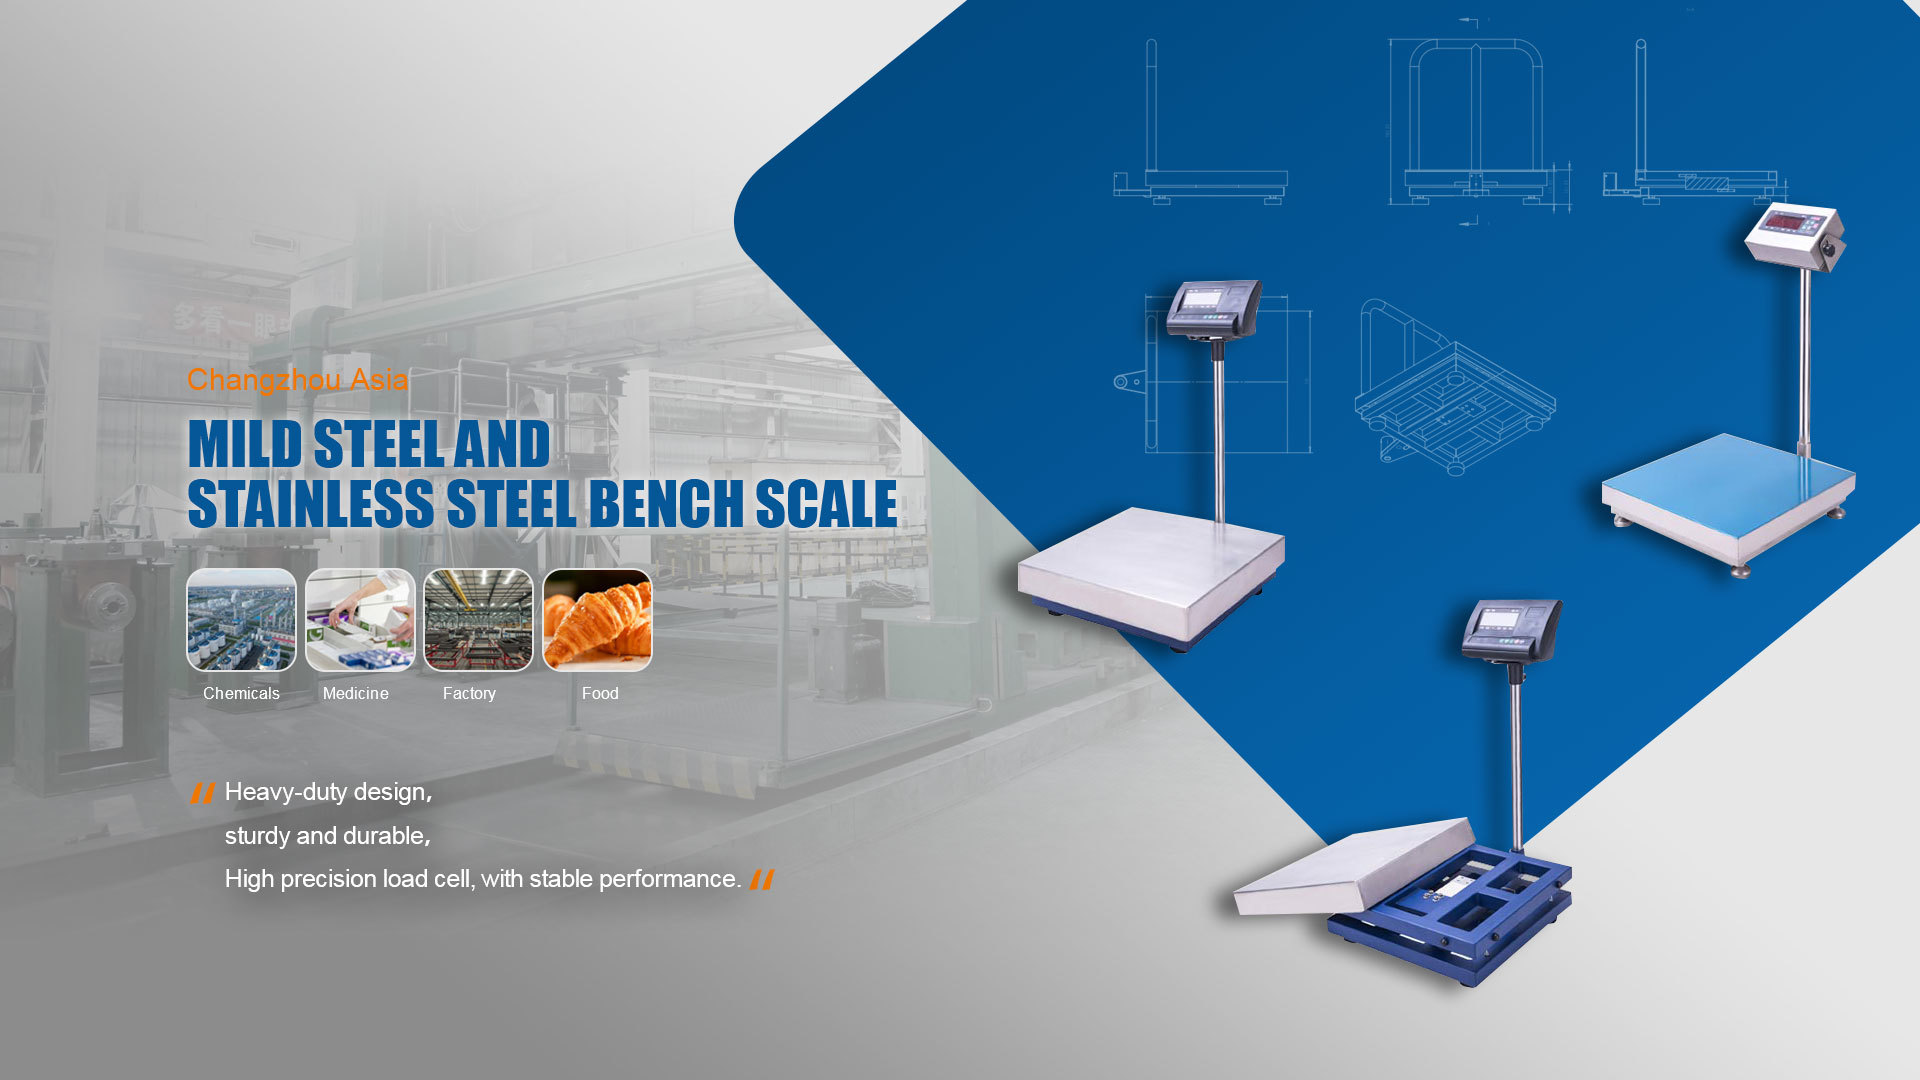 MILD STEEL AND STAINLESS STEEL BENCH SCALE